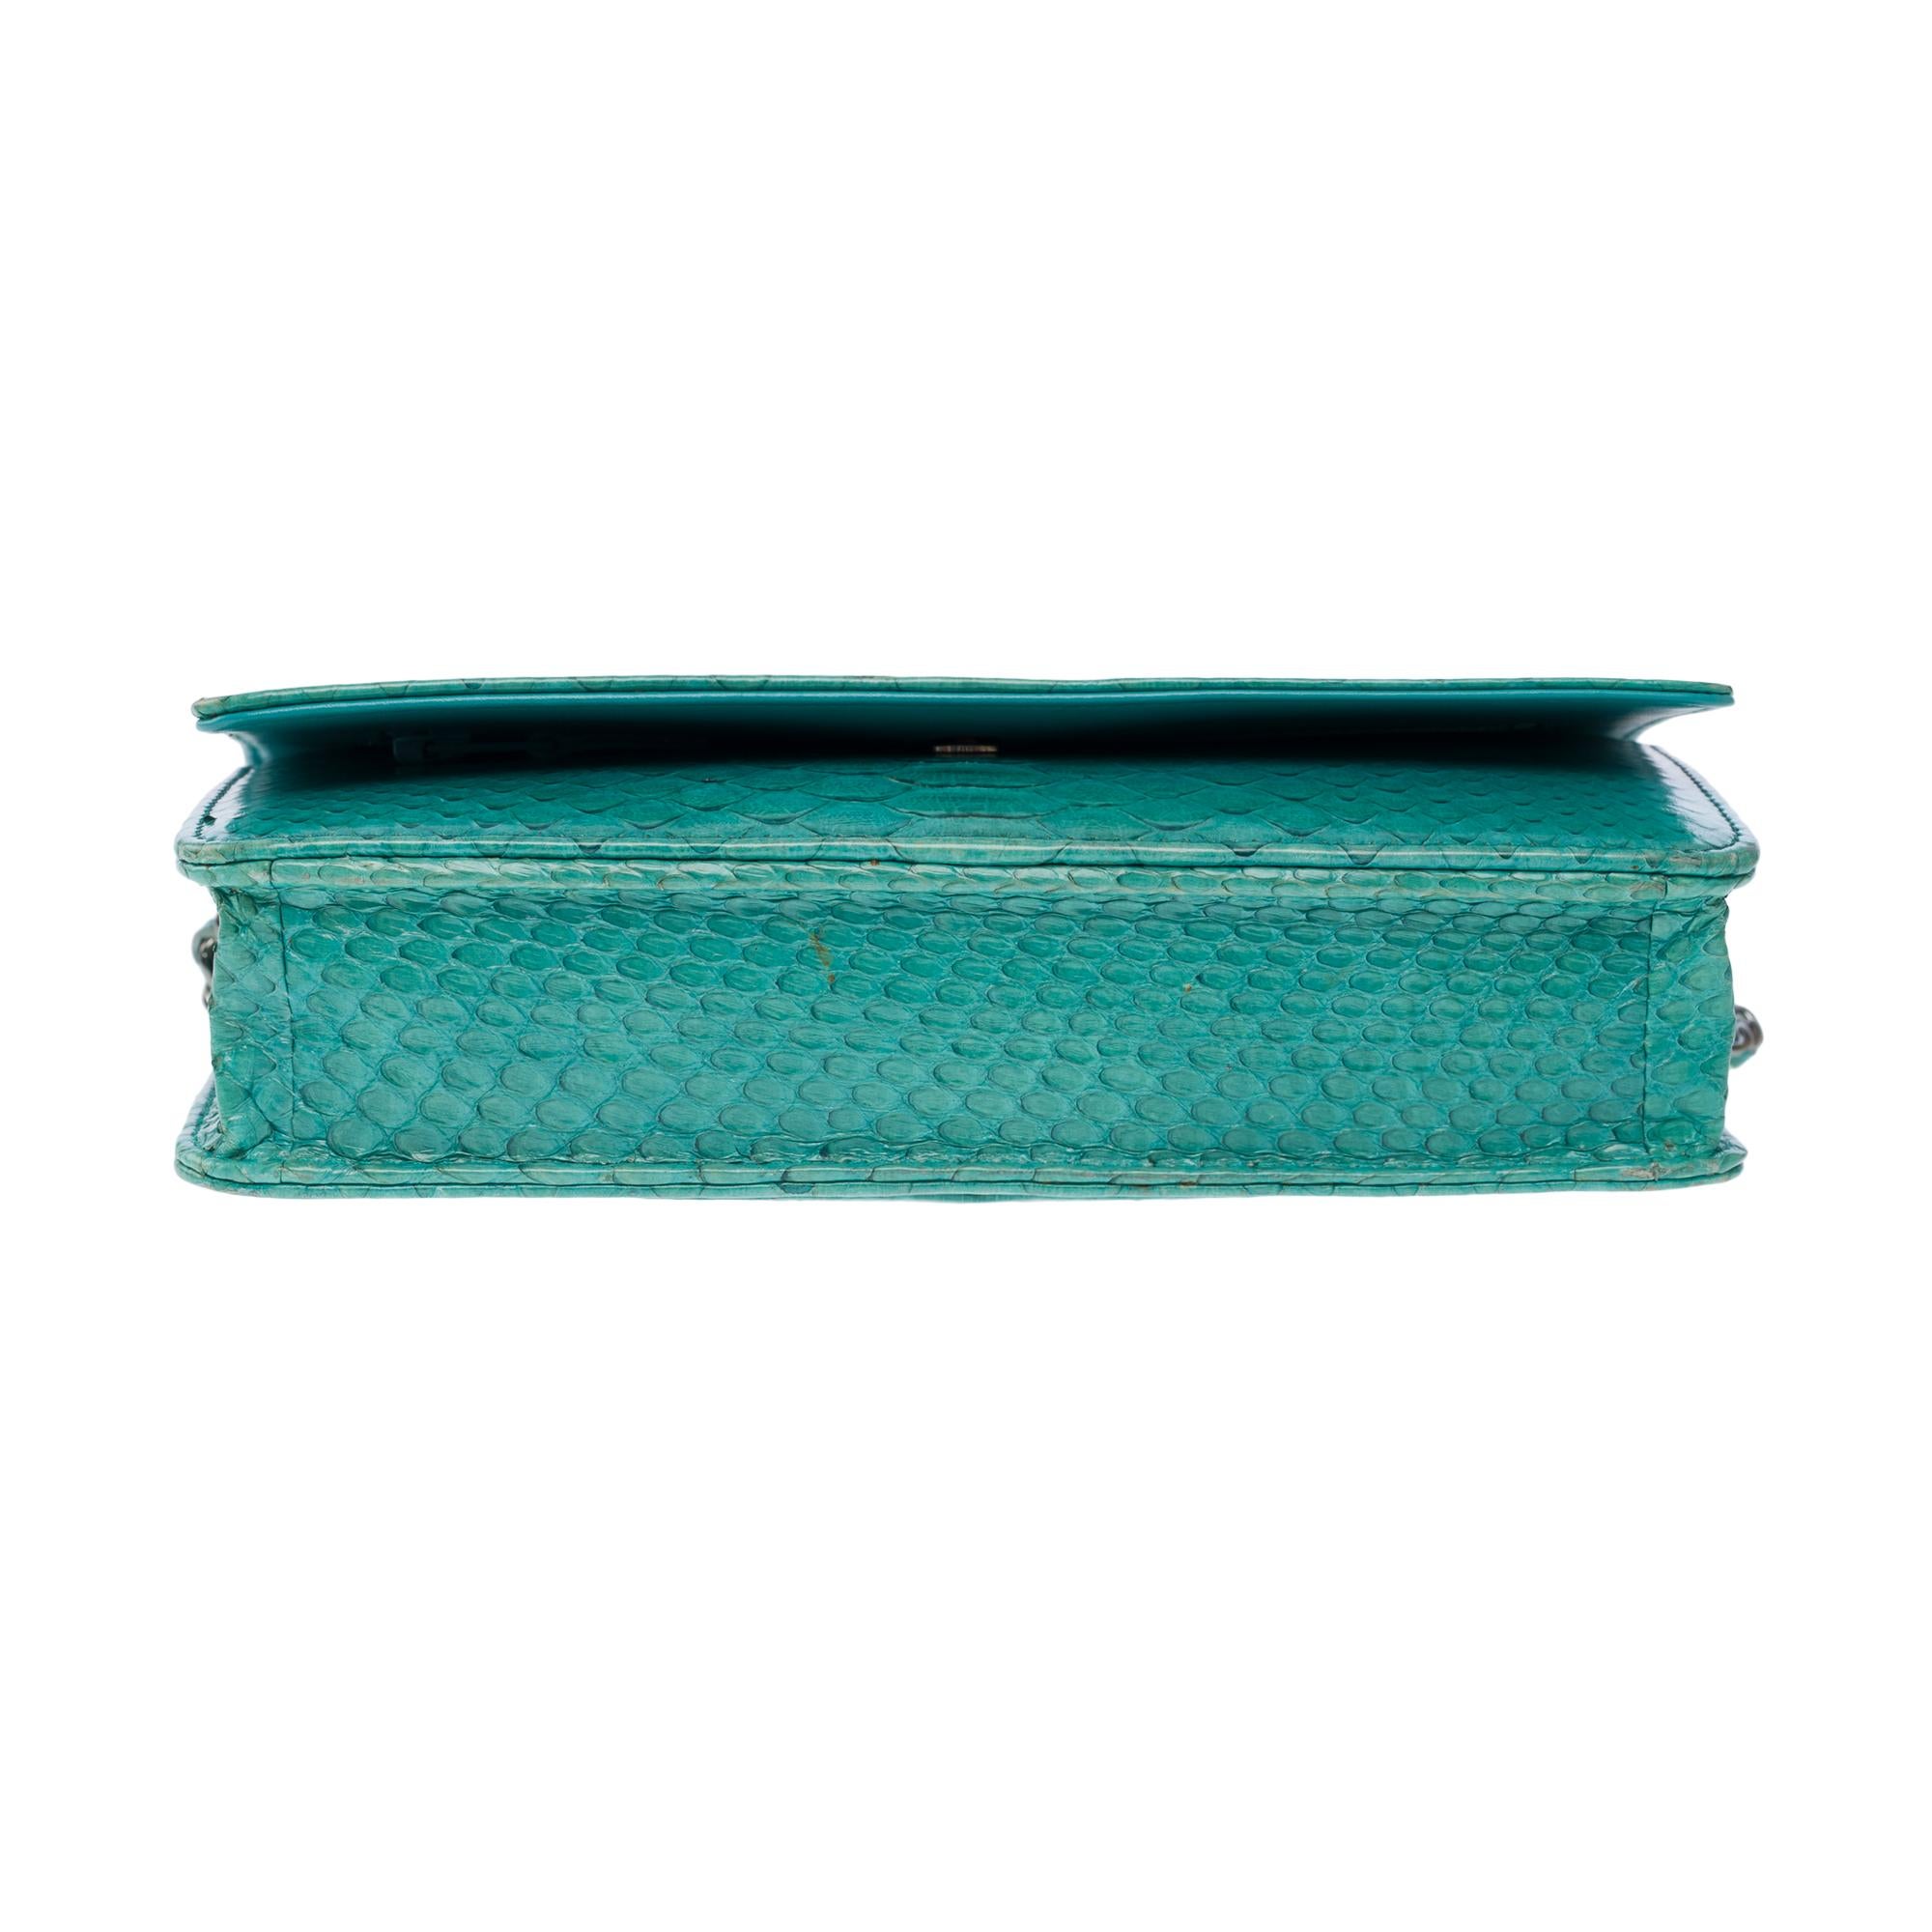 Chanel Wallet on Chain (WOC)  shoulder bag in Turquoise Blue Python leather, SHW 8